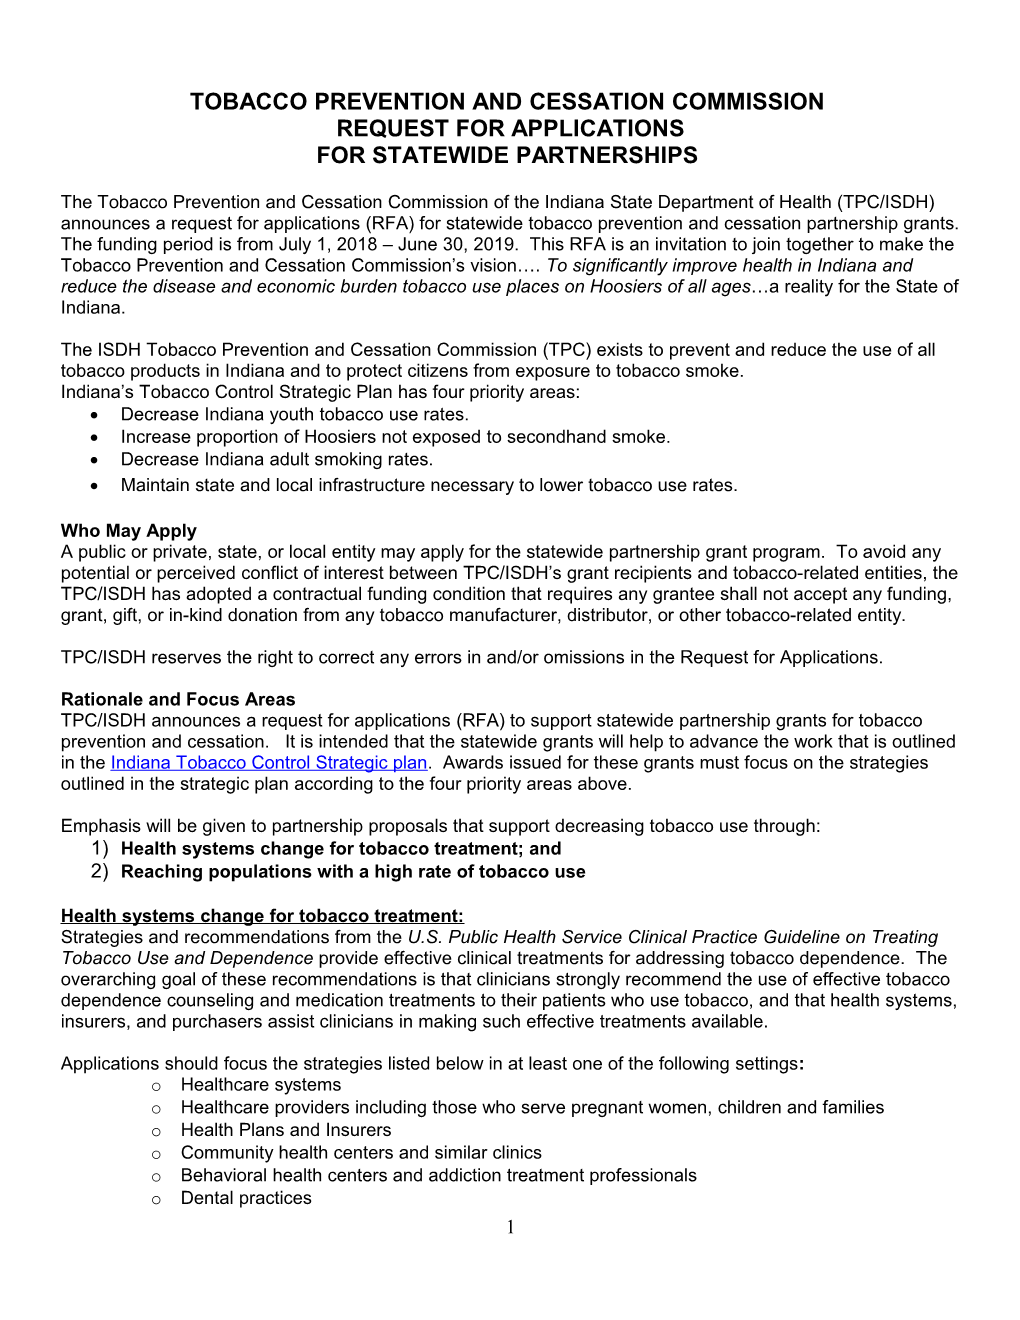 Tobacco Prevention and Cessation Commission Request for Applications for Statewide Partnerships